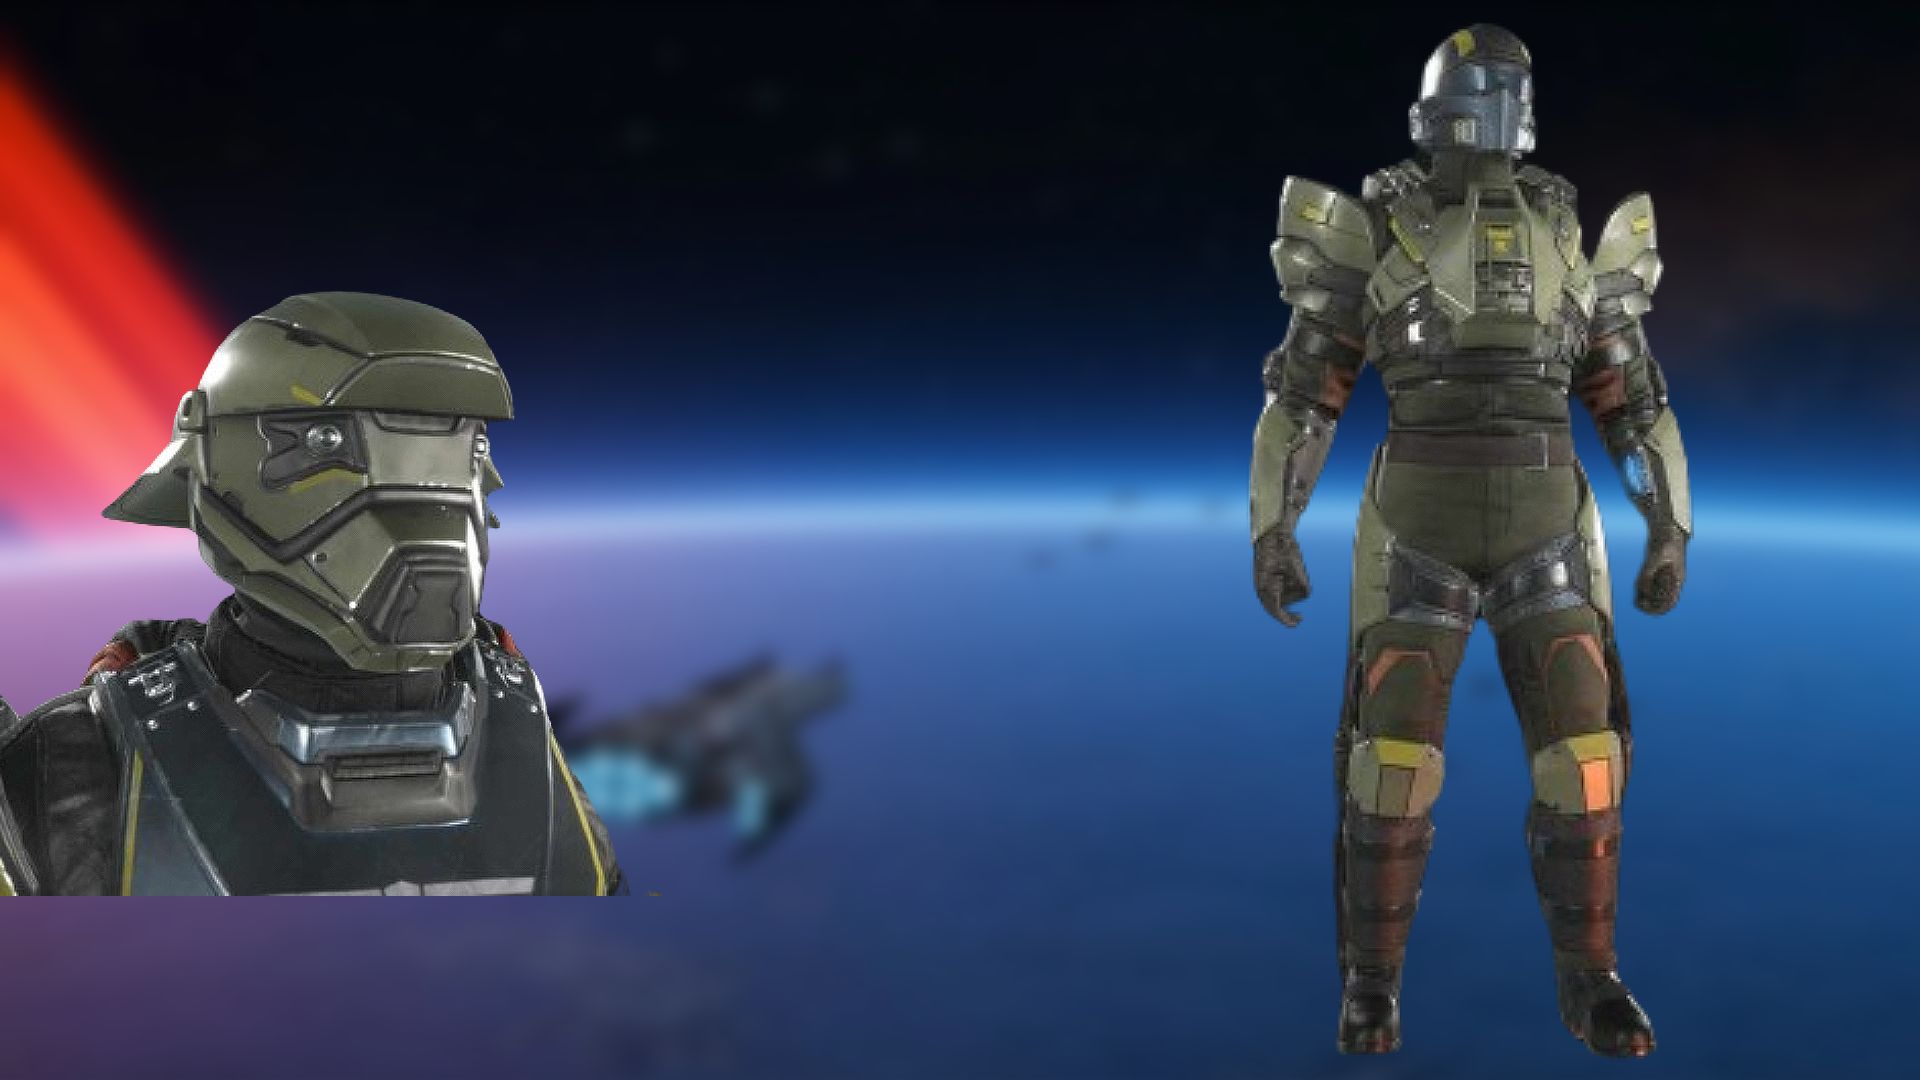 The EX-16 Prototype 16 armor set in Helldivers 2